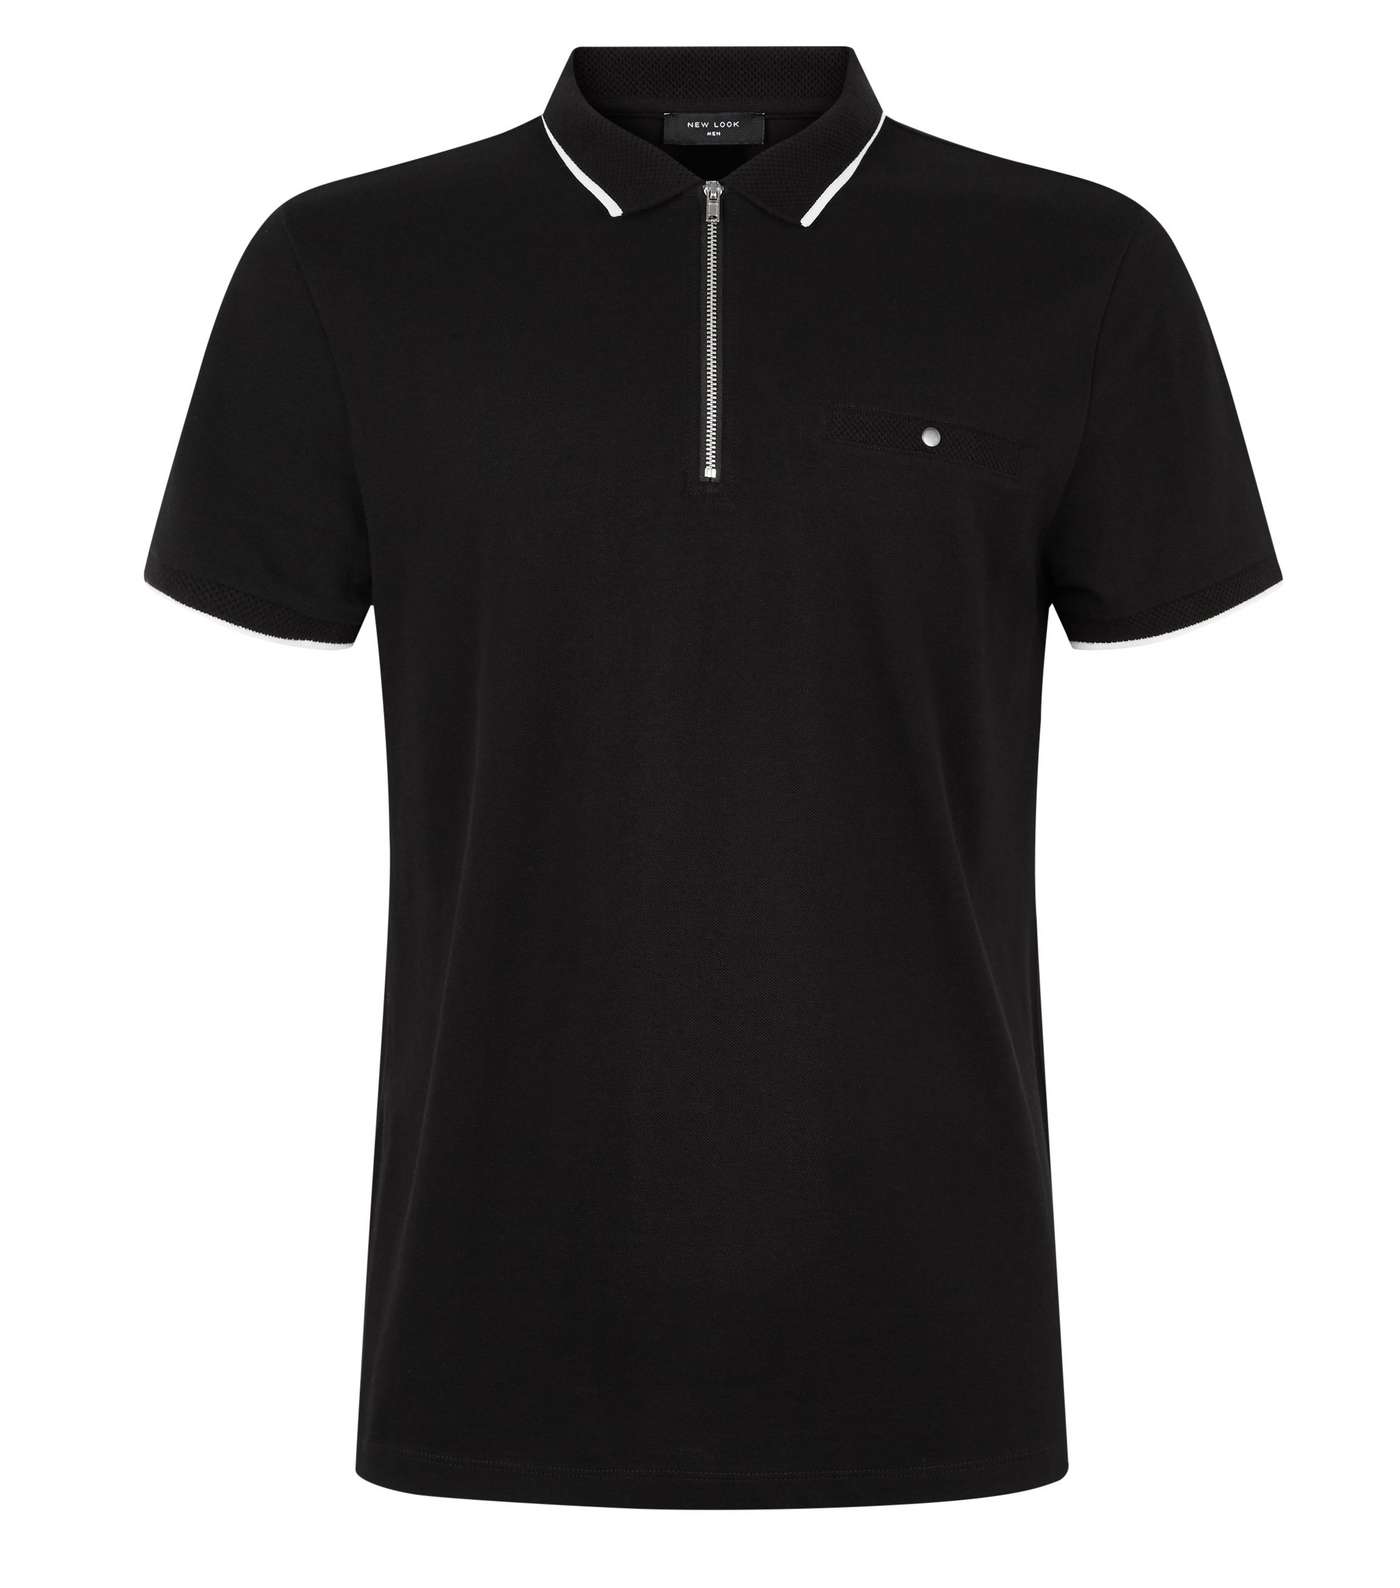 Black Tipped Zip Front Polo Shirt Image 4